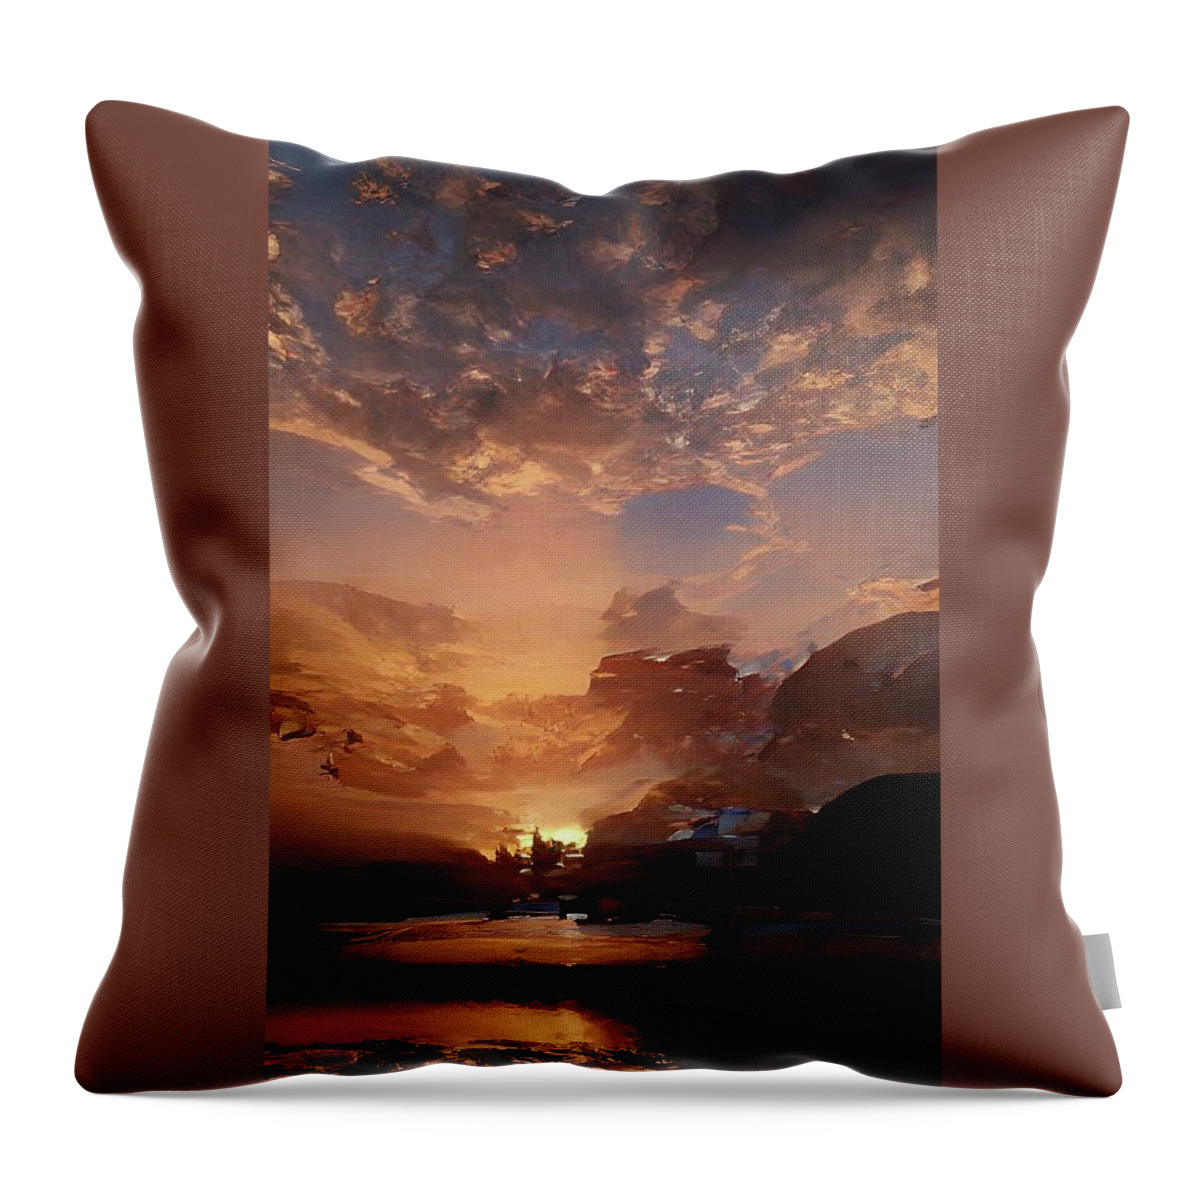  Throw Pillow featuring the digital art Beam Me Up #1 by Rod Turner